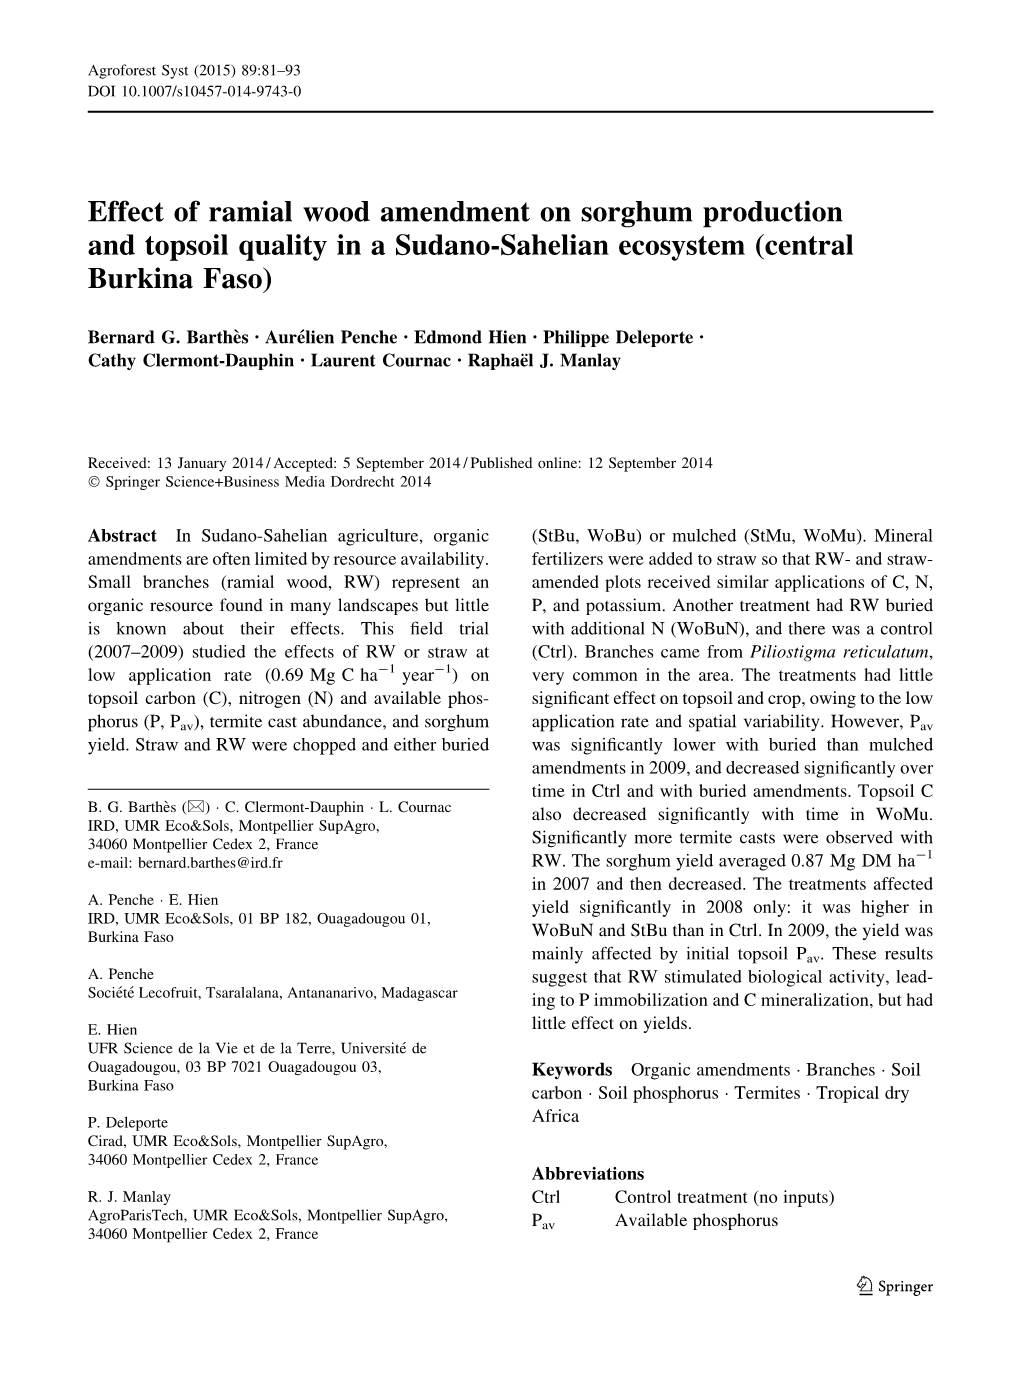 Effect of Ramial Wood Amendment on Sorghum Production and Topsoil Quality in a Sudano-Sahelian Ecosystem (Central Burkina Faso)